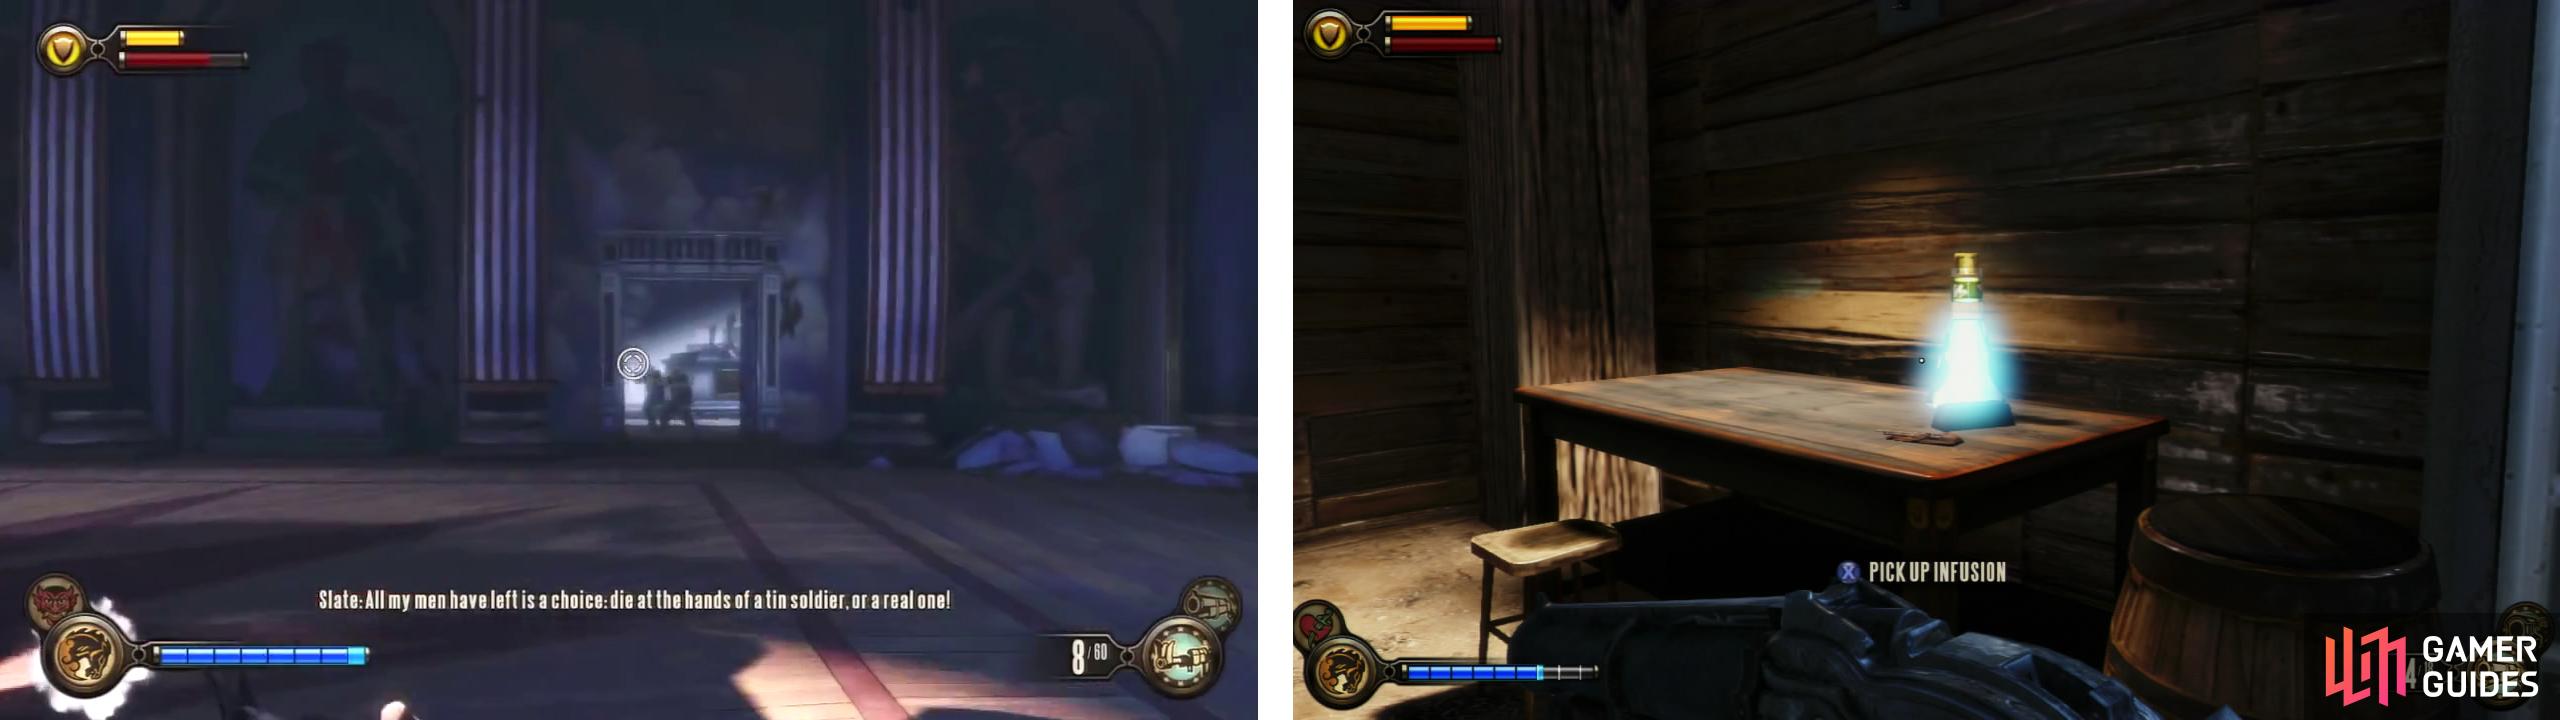 After the ambush, enter the room the enemies emerged from (left) to find a Infusion Upgrade inside (right).